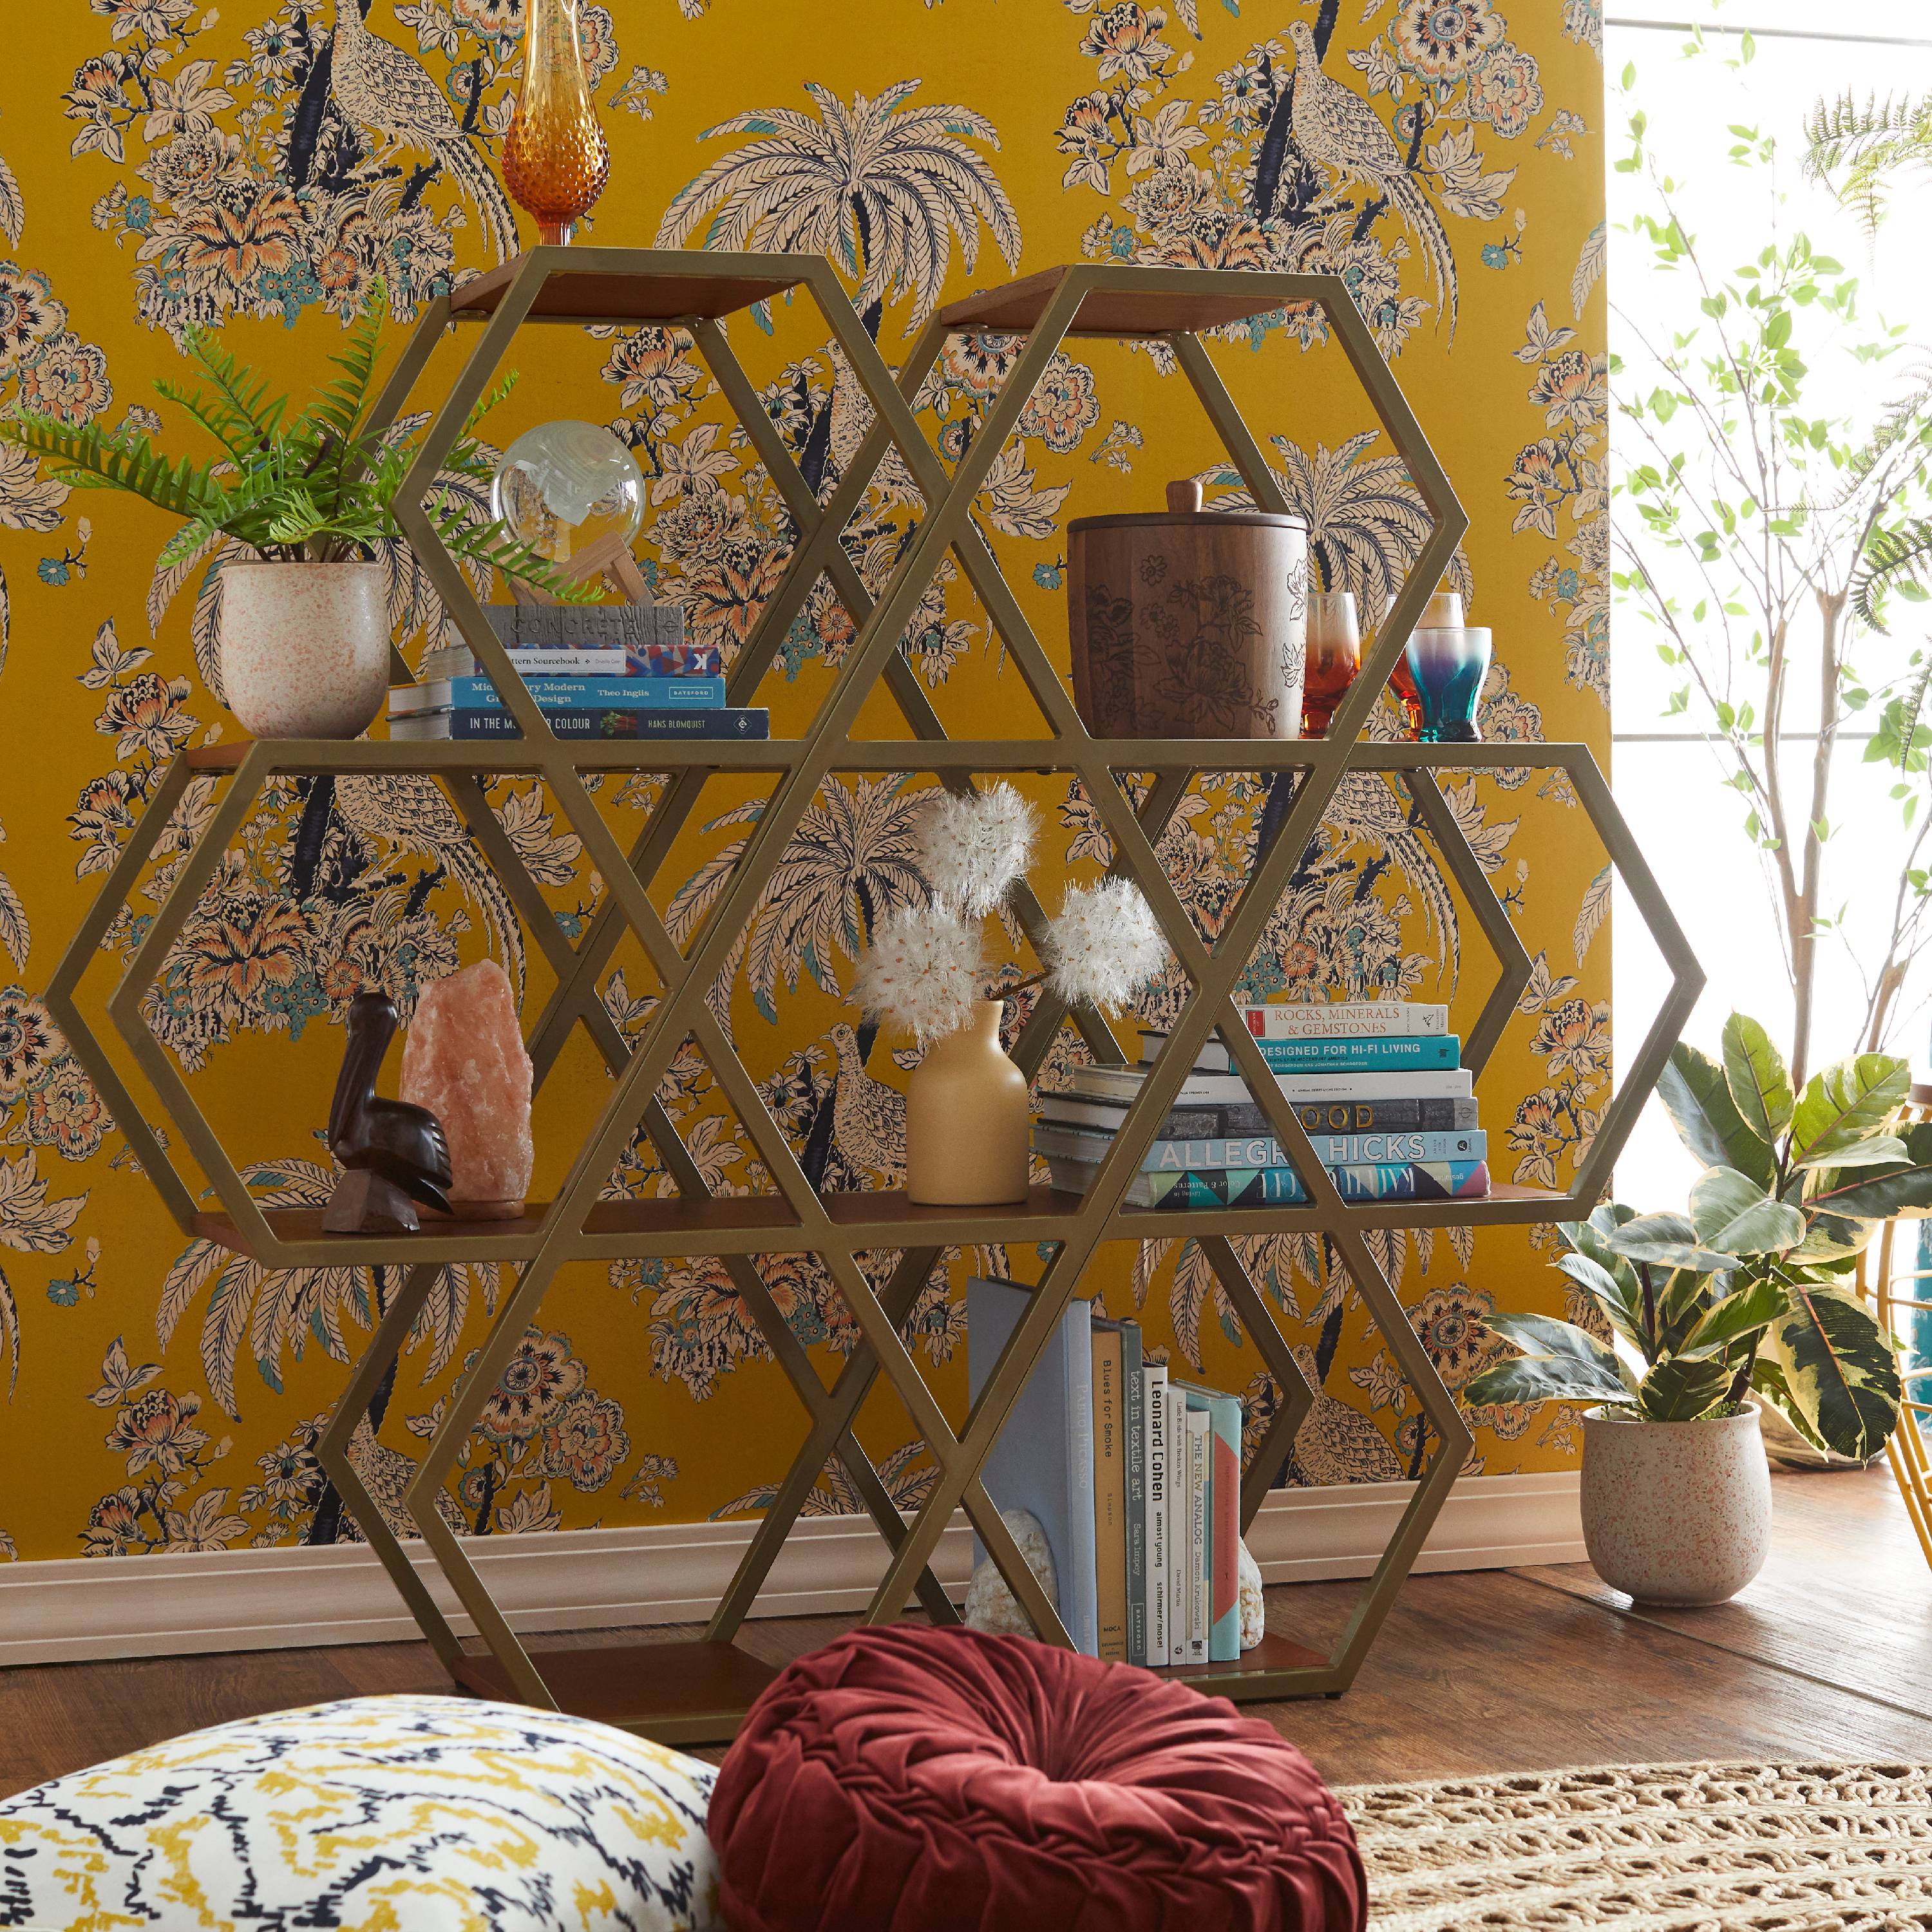 Hexagon Large Bookshelf by Drew Barrymore Flower Home - image 2 of 10